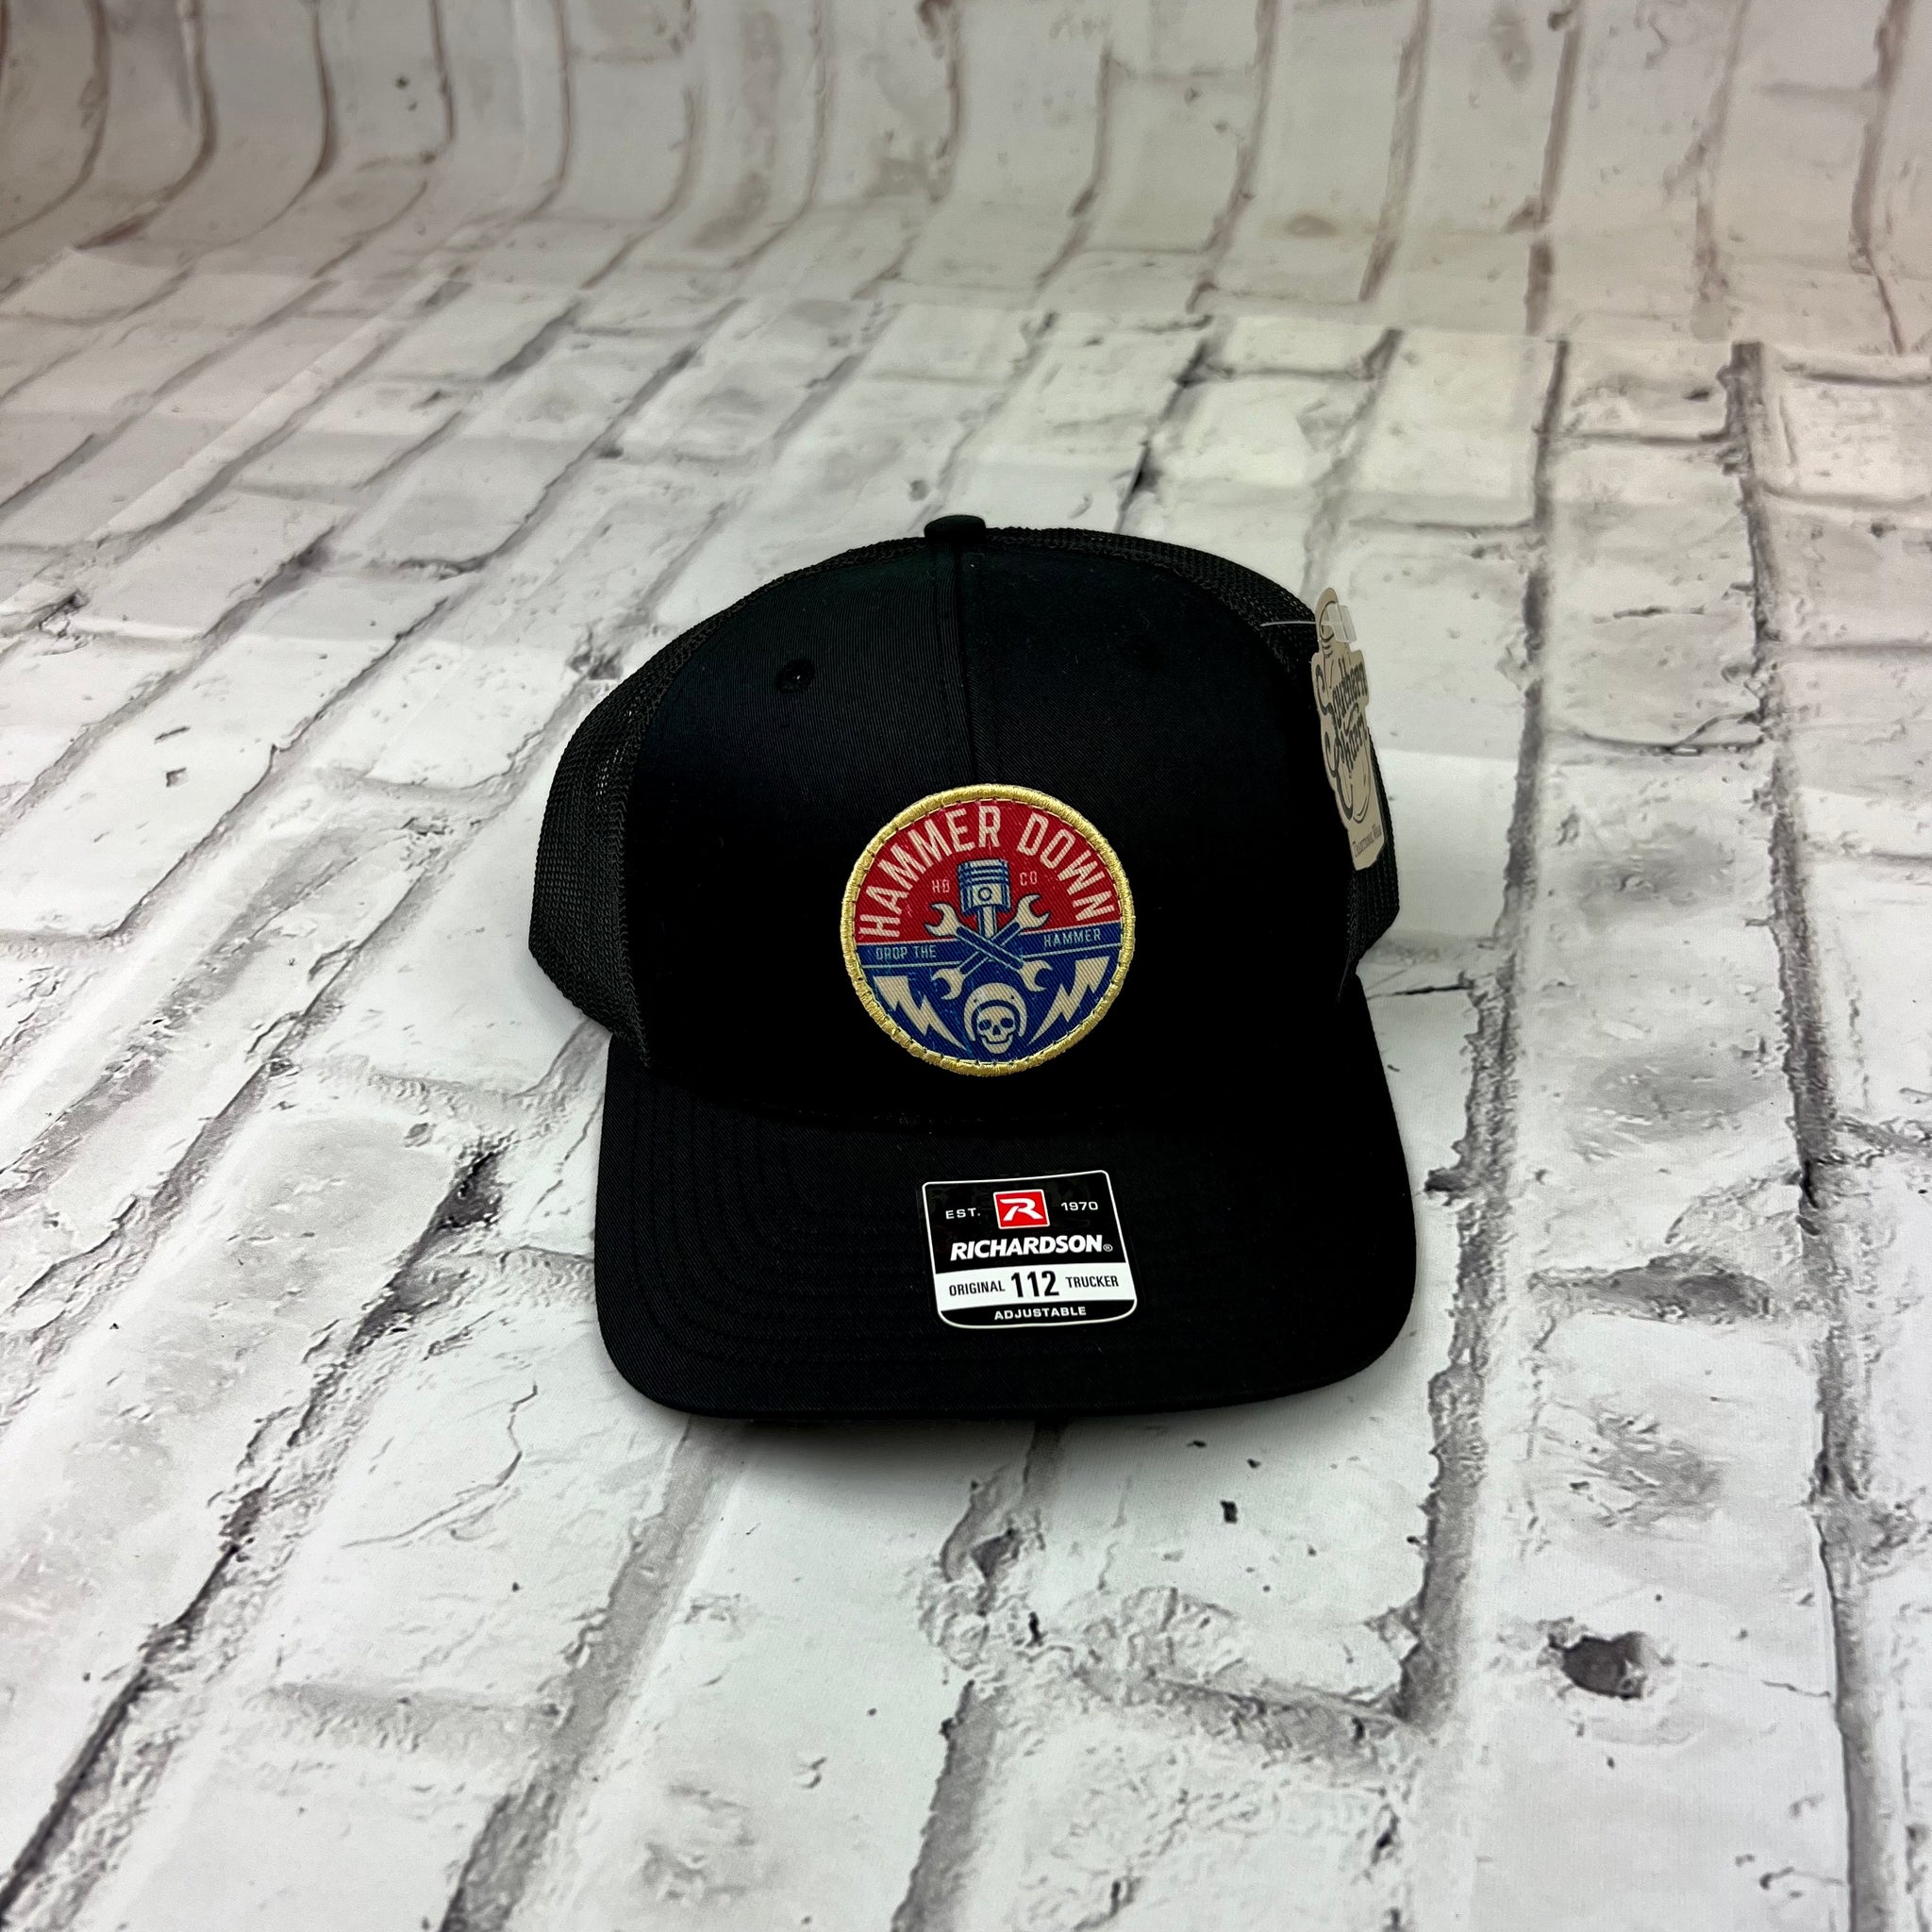 Hammer Down "Gear Head USA" Hat - Black with Rope Patch